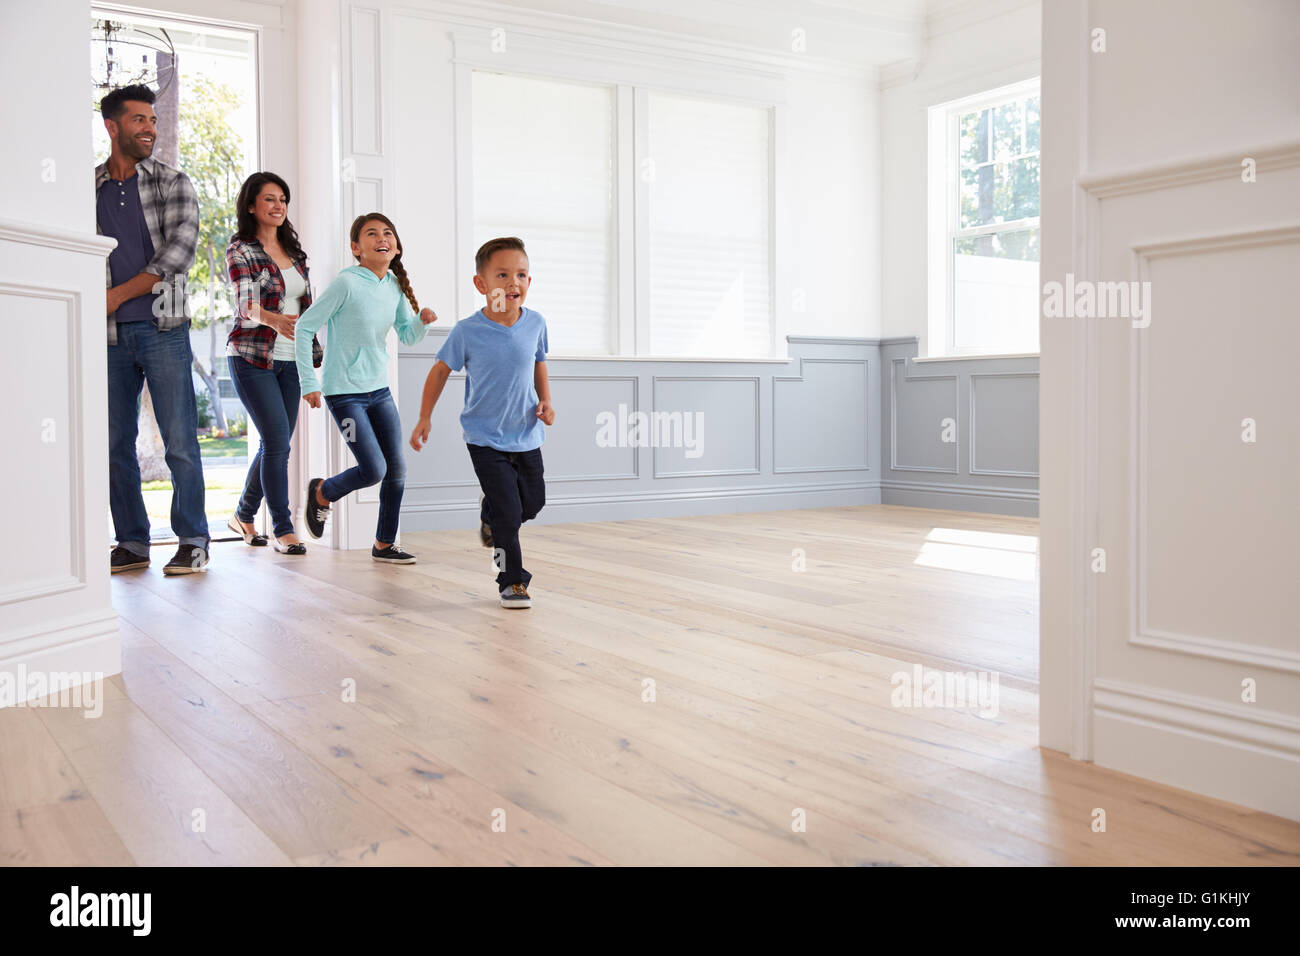 Hispanic Family Viewing Potential New Home Stock Photo